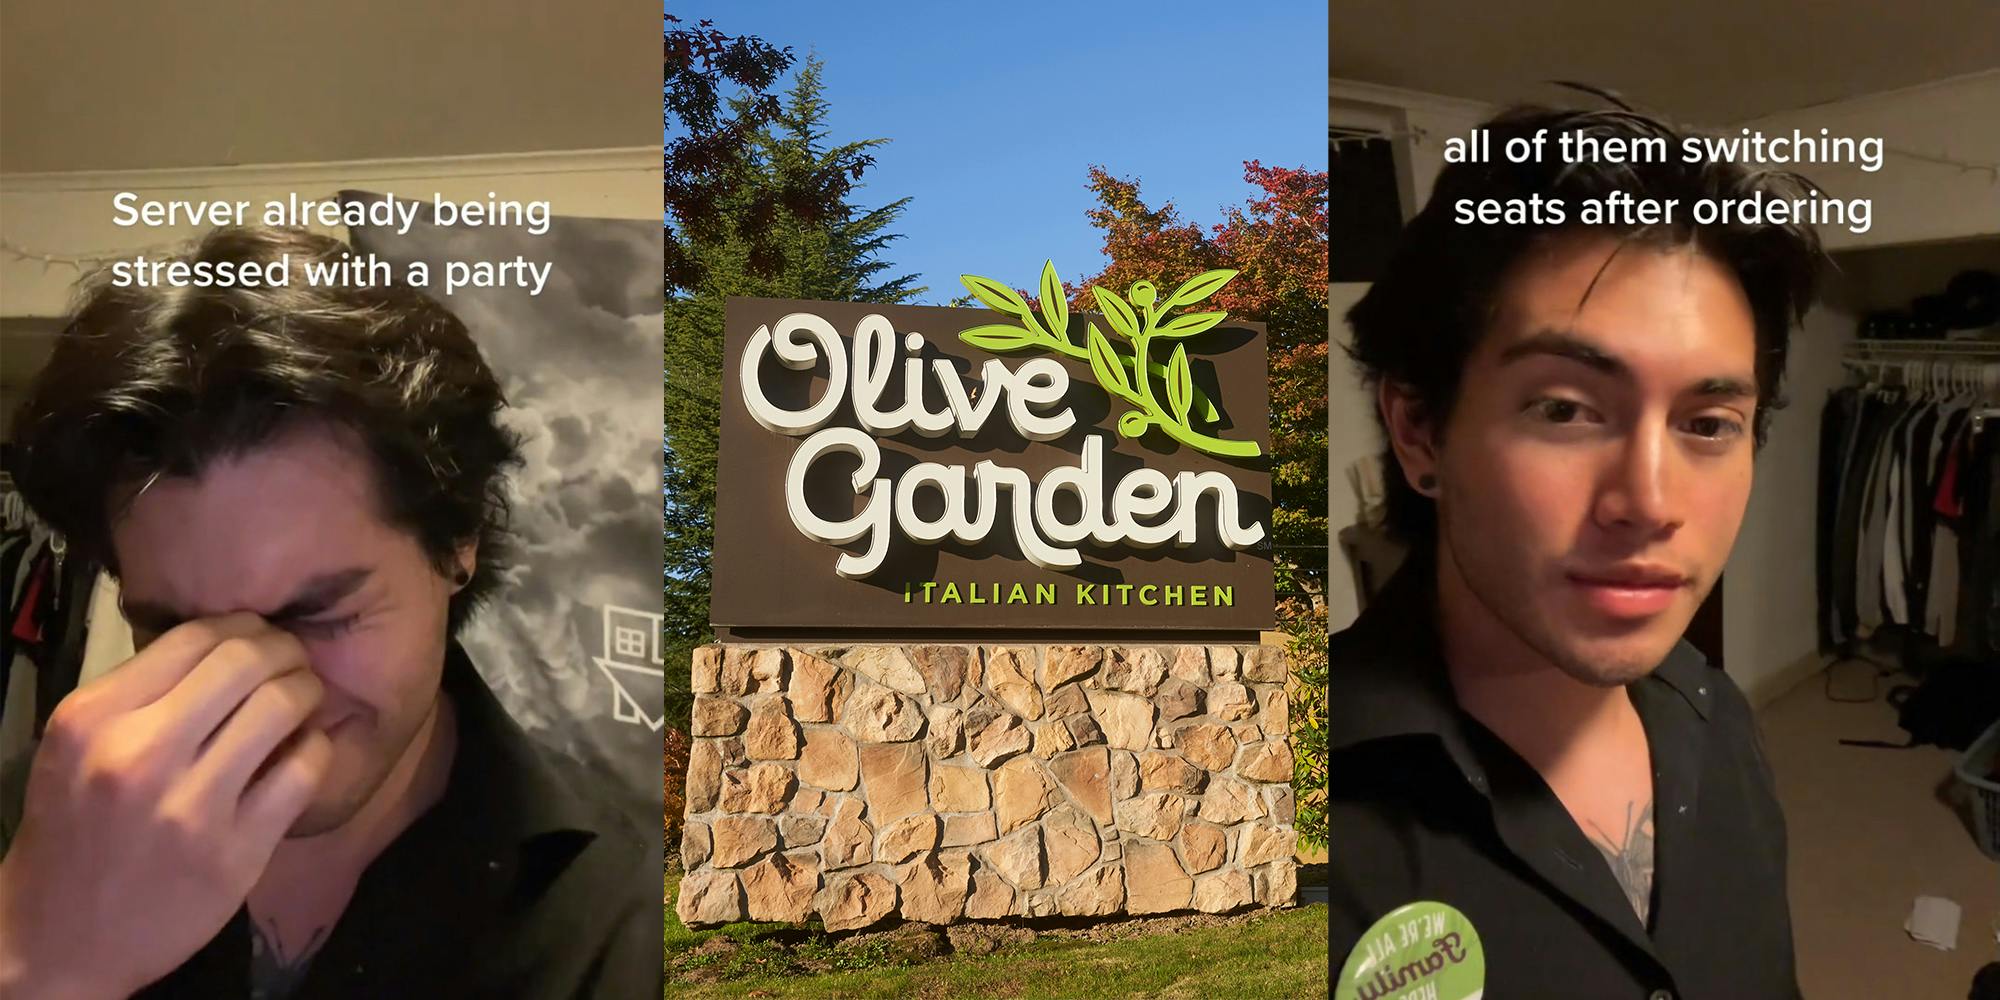 Olive Garden worker complains about customers who switch seats after ordering